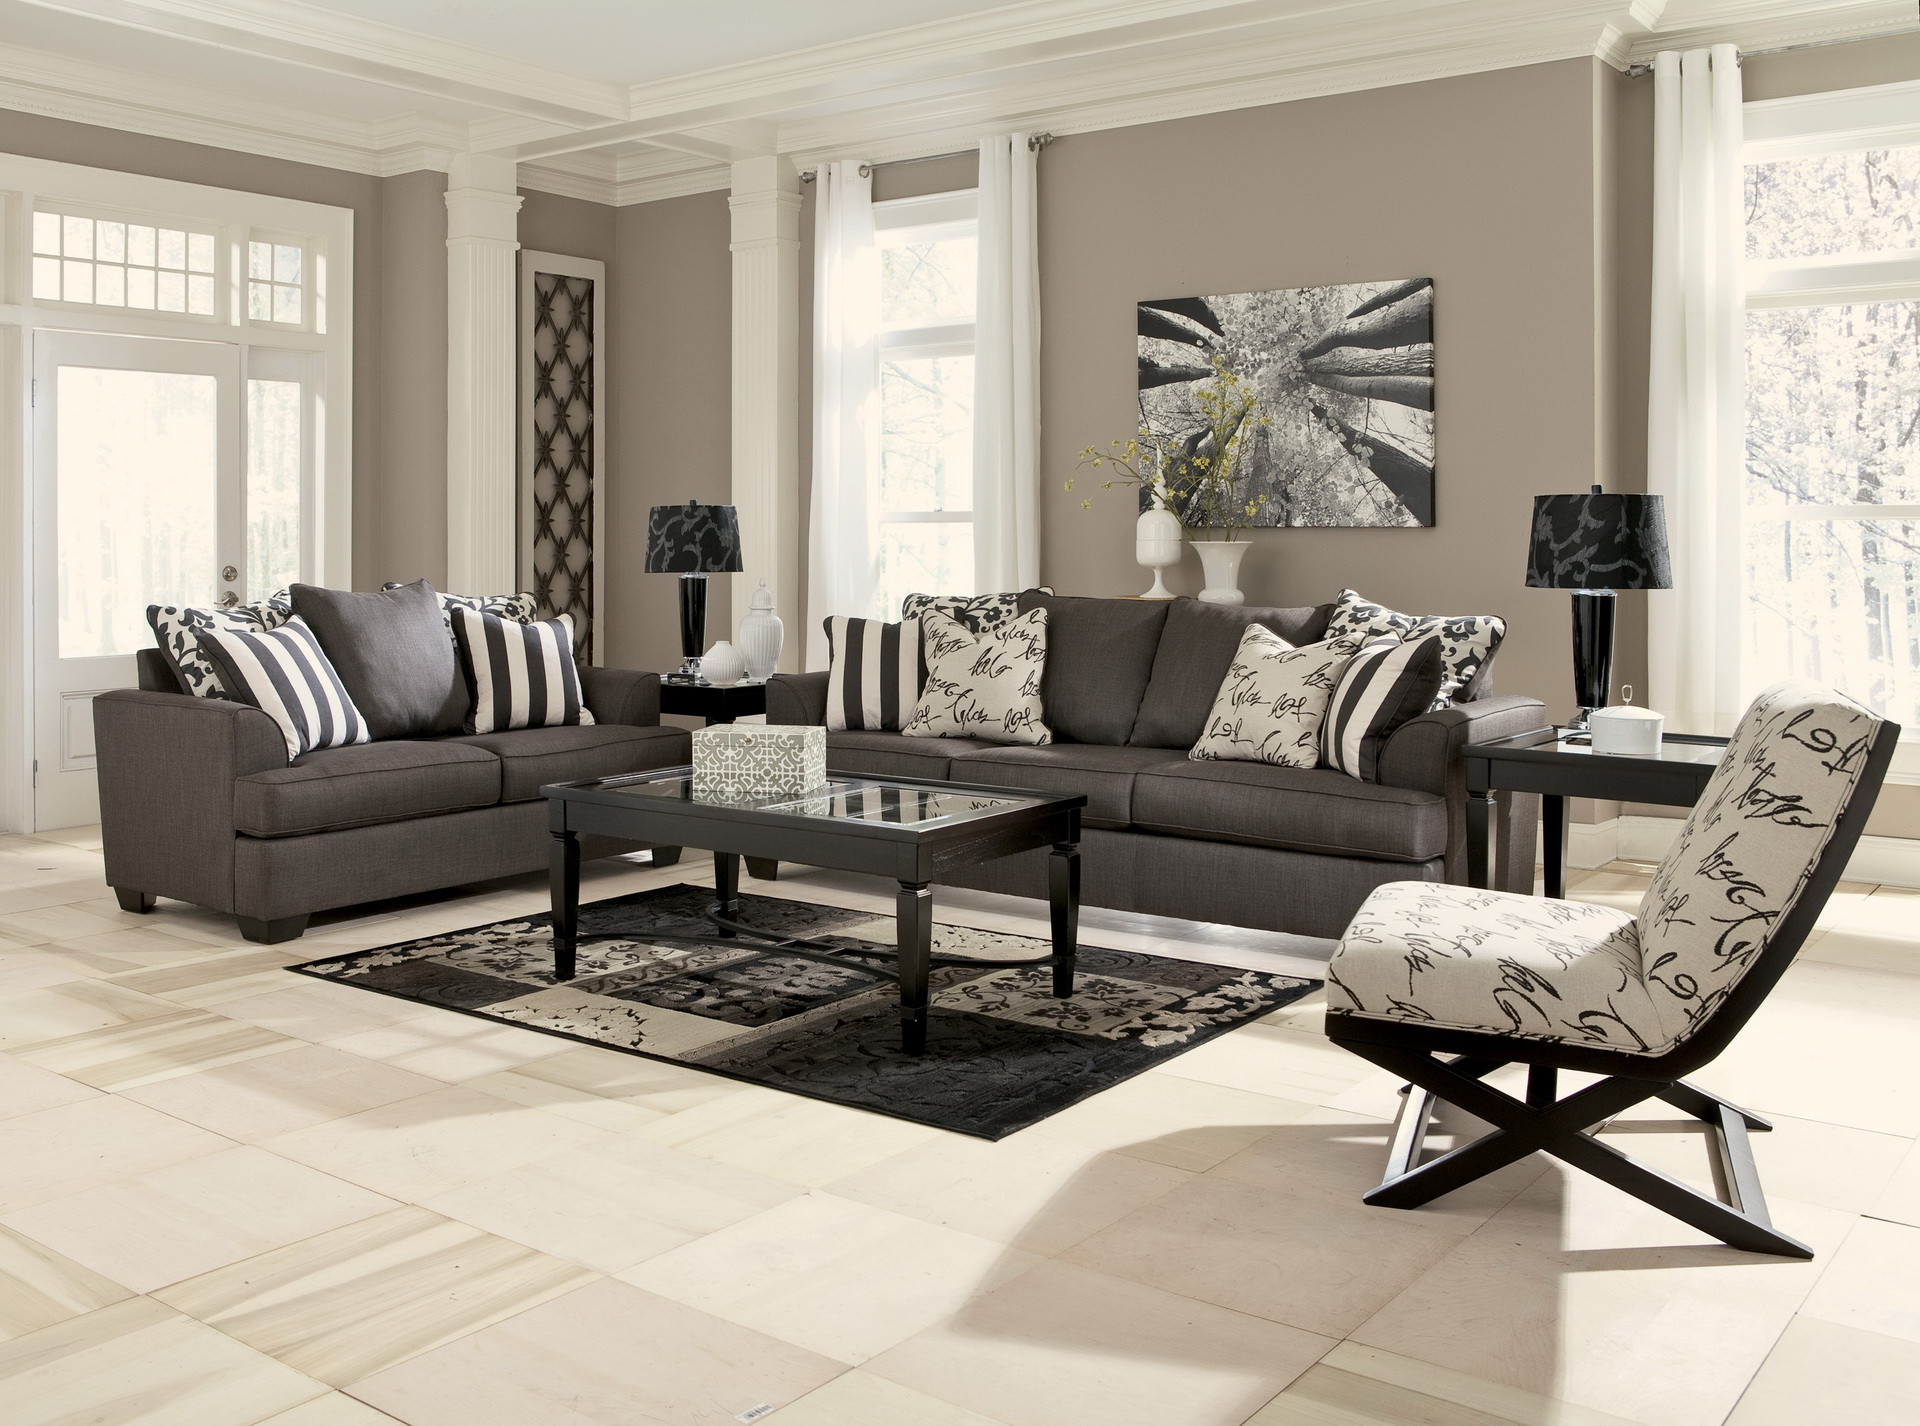 Accent Chairs For Living Room
 Accent chairs for living room 23 reasons to